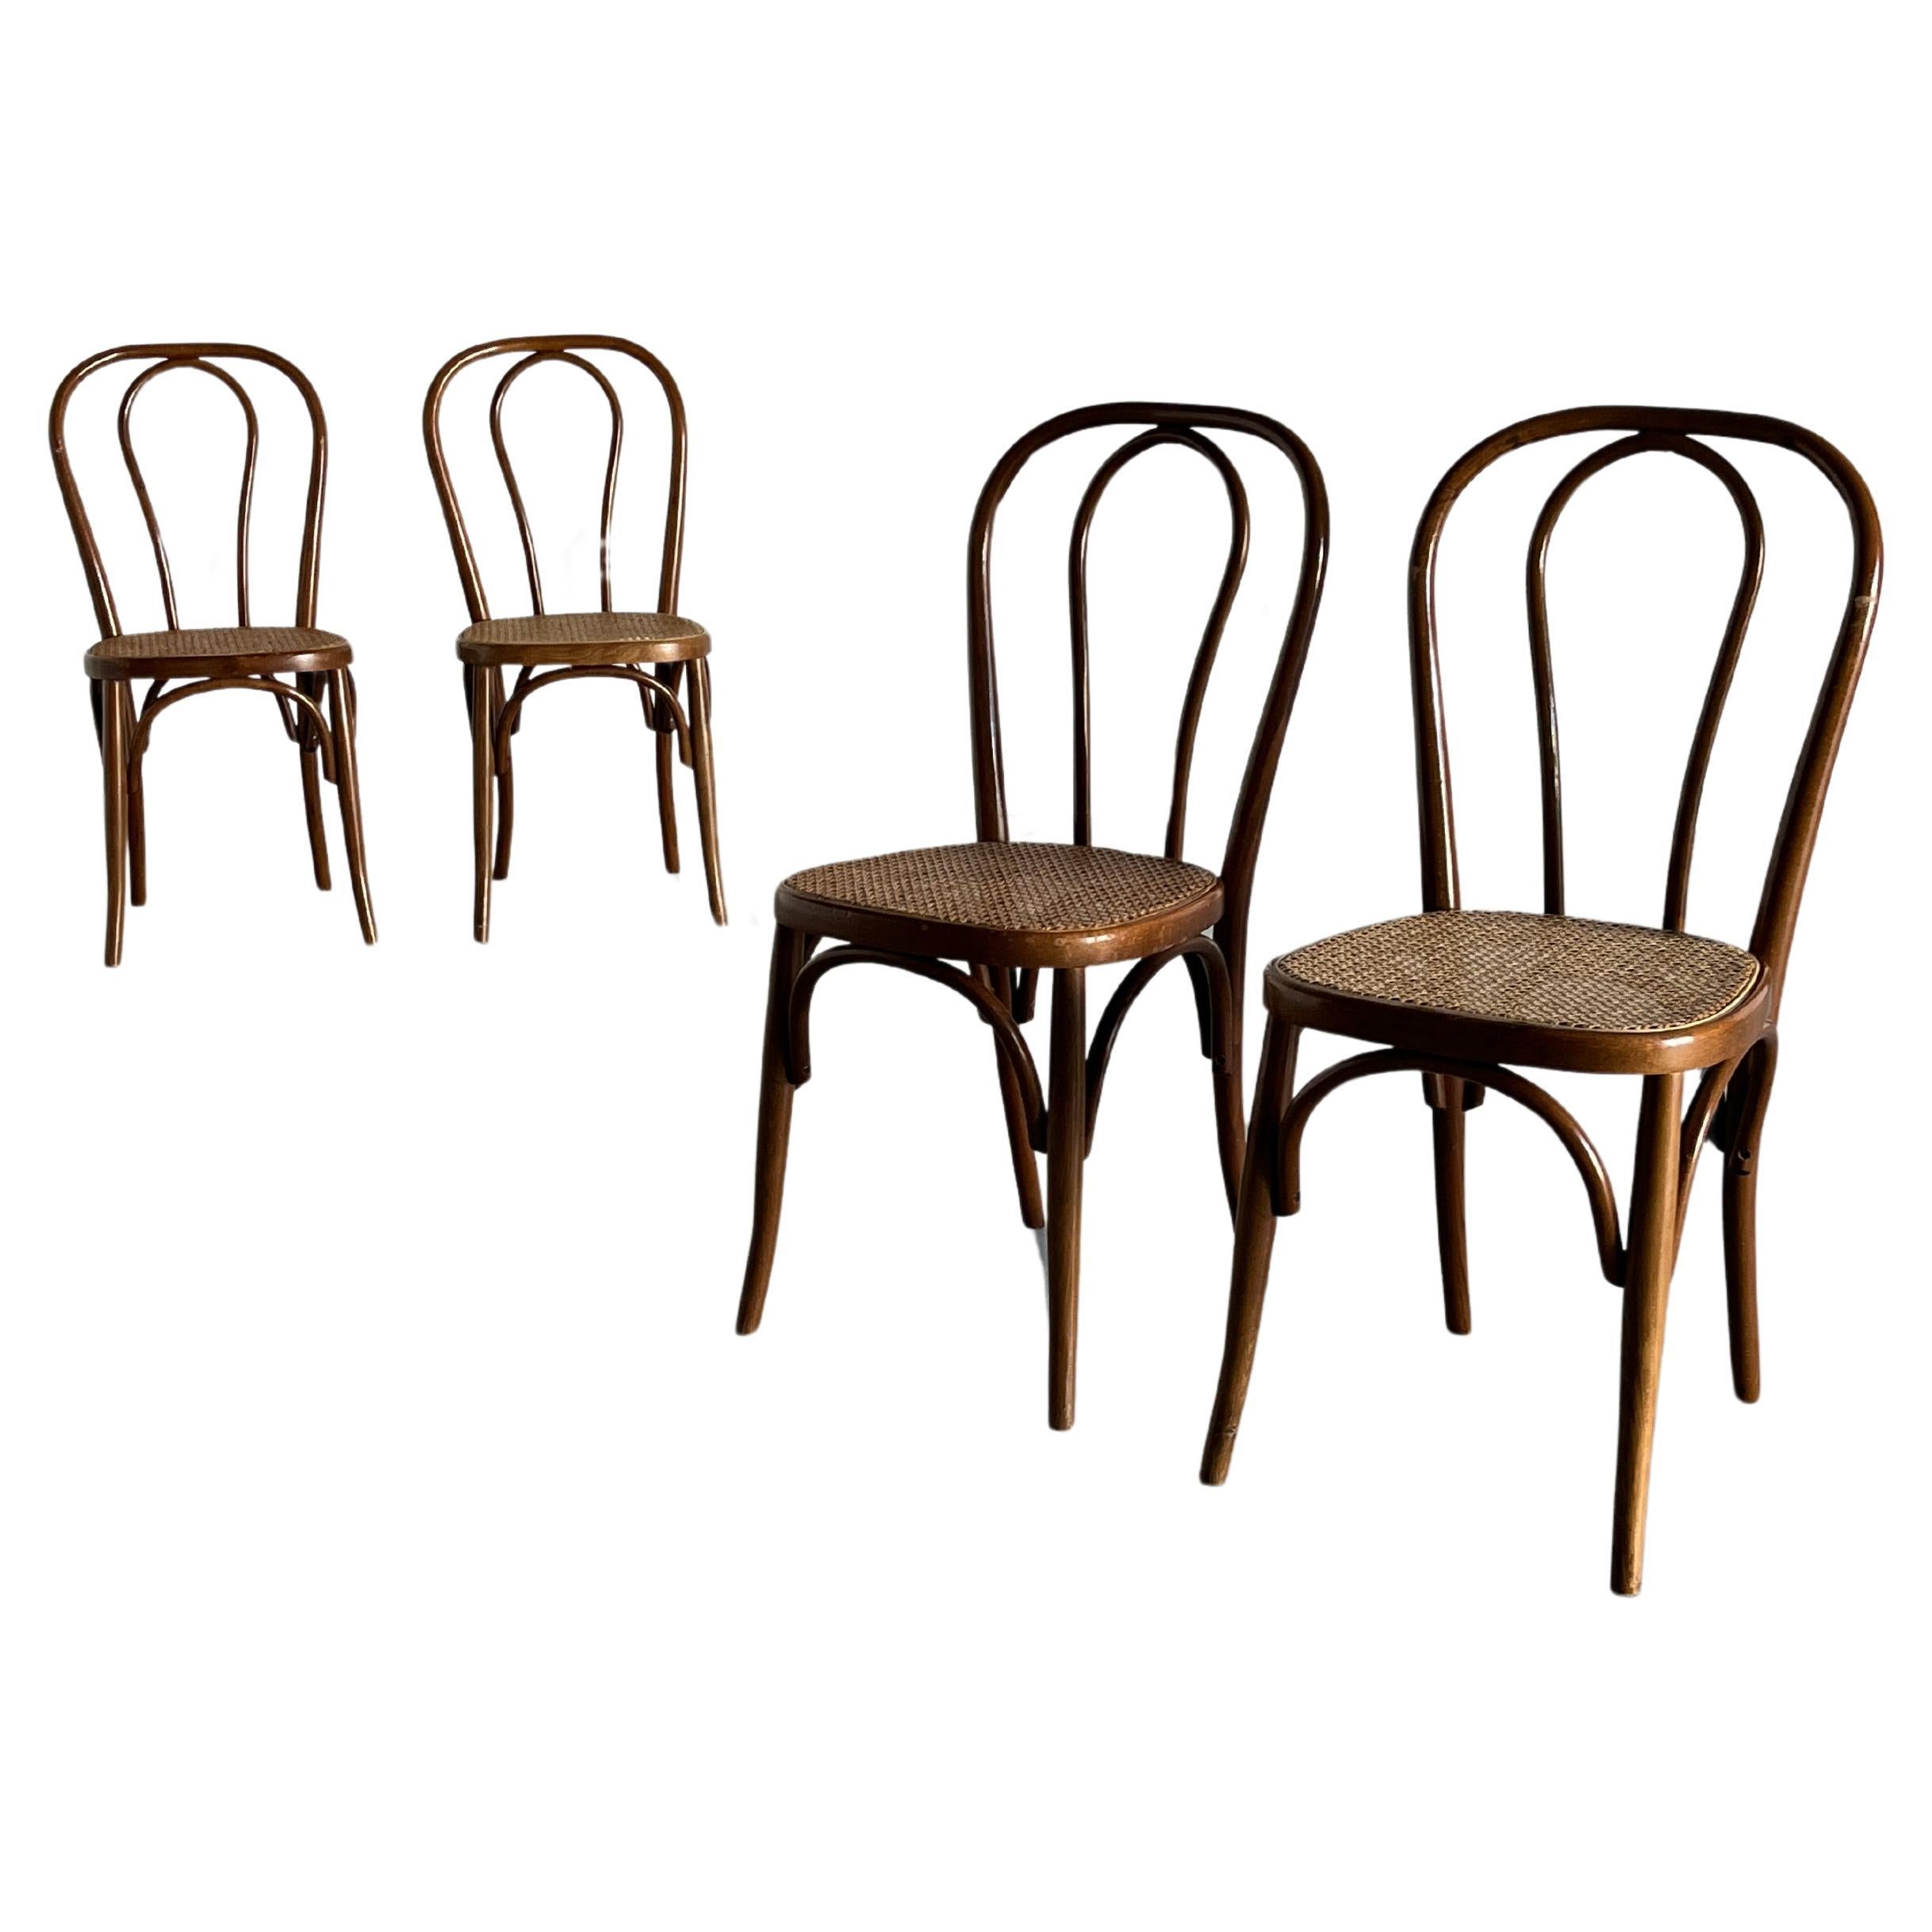 Set of 4 Vintage Thonet Bentwood Style Chairs, European Bistro Chairs, 1950s For Sale